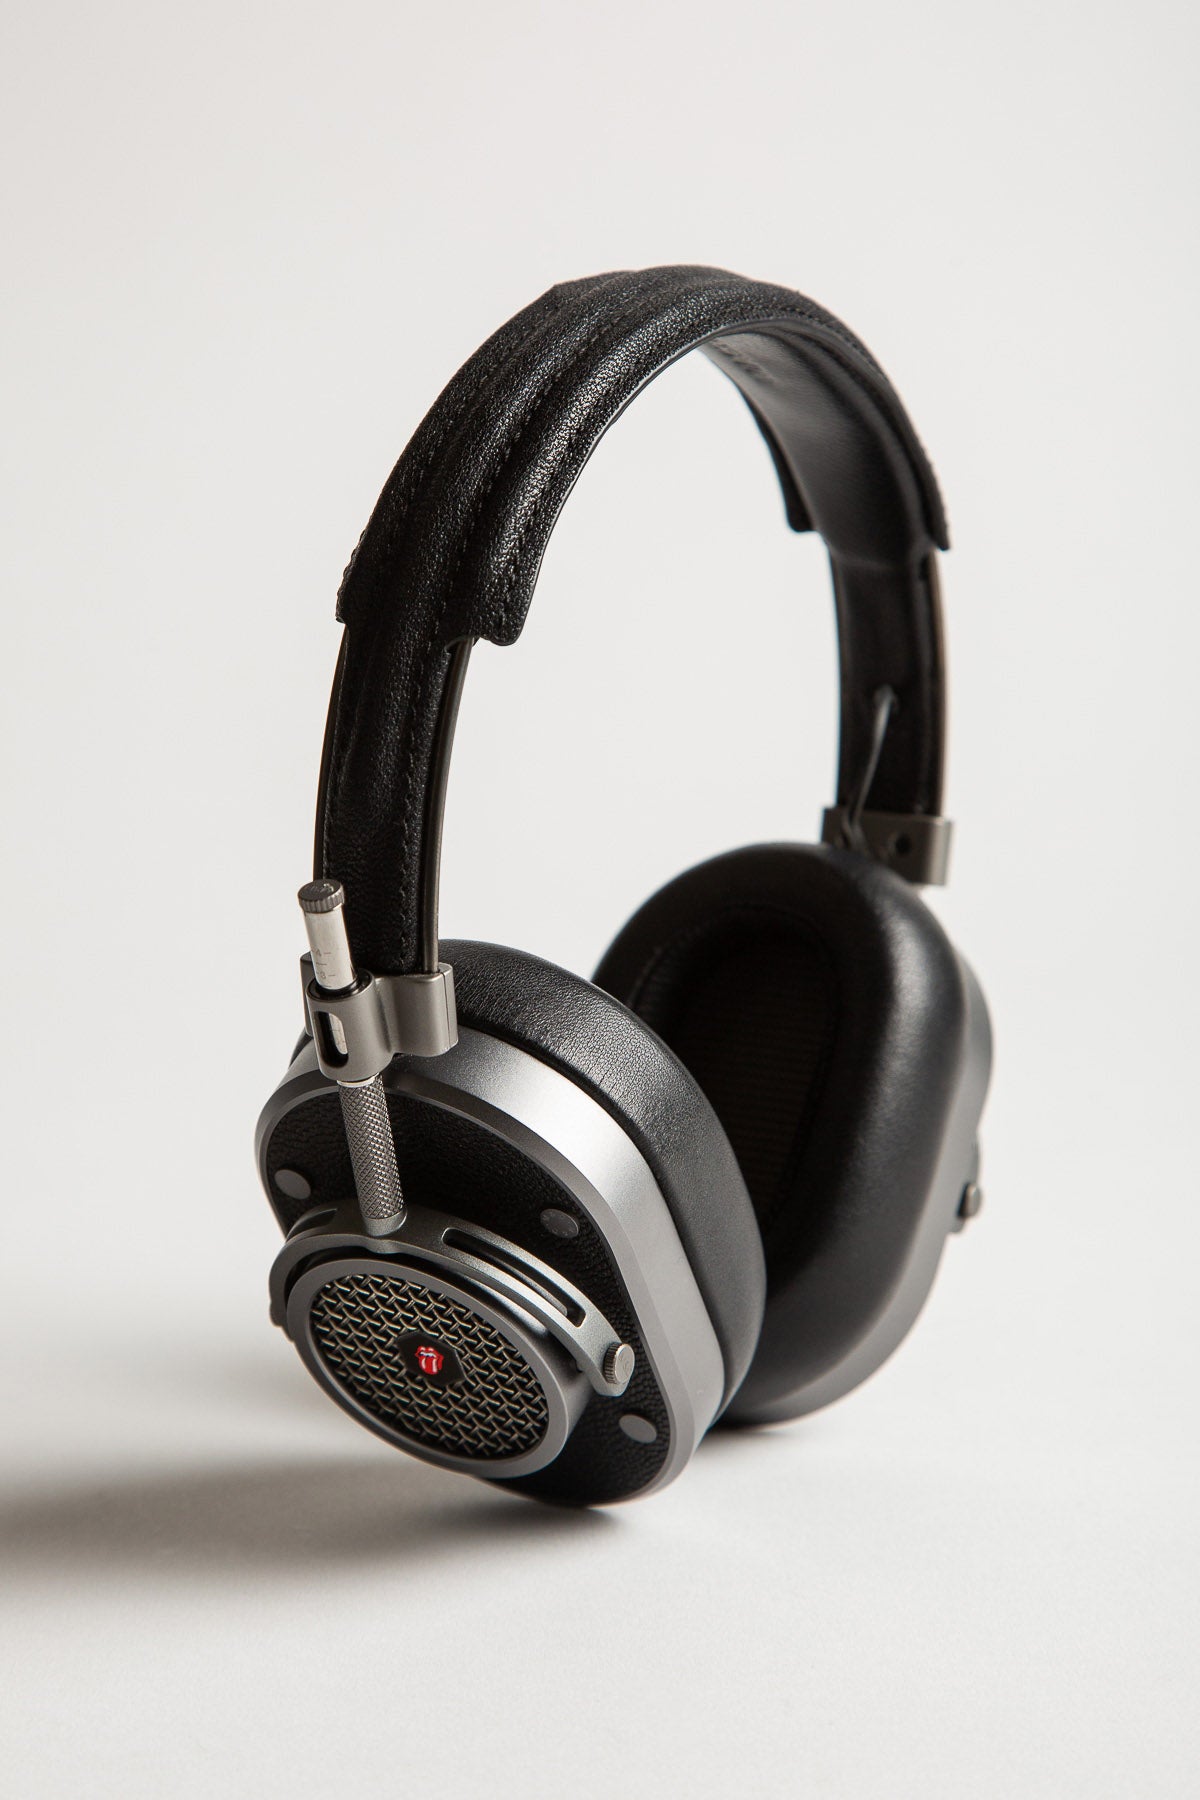 MASTER & DYNAMIC | THE ROLLING STONES MW40 WIRELESS HEADPHONES